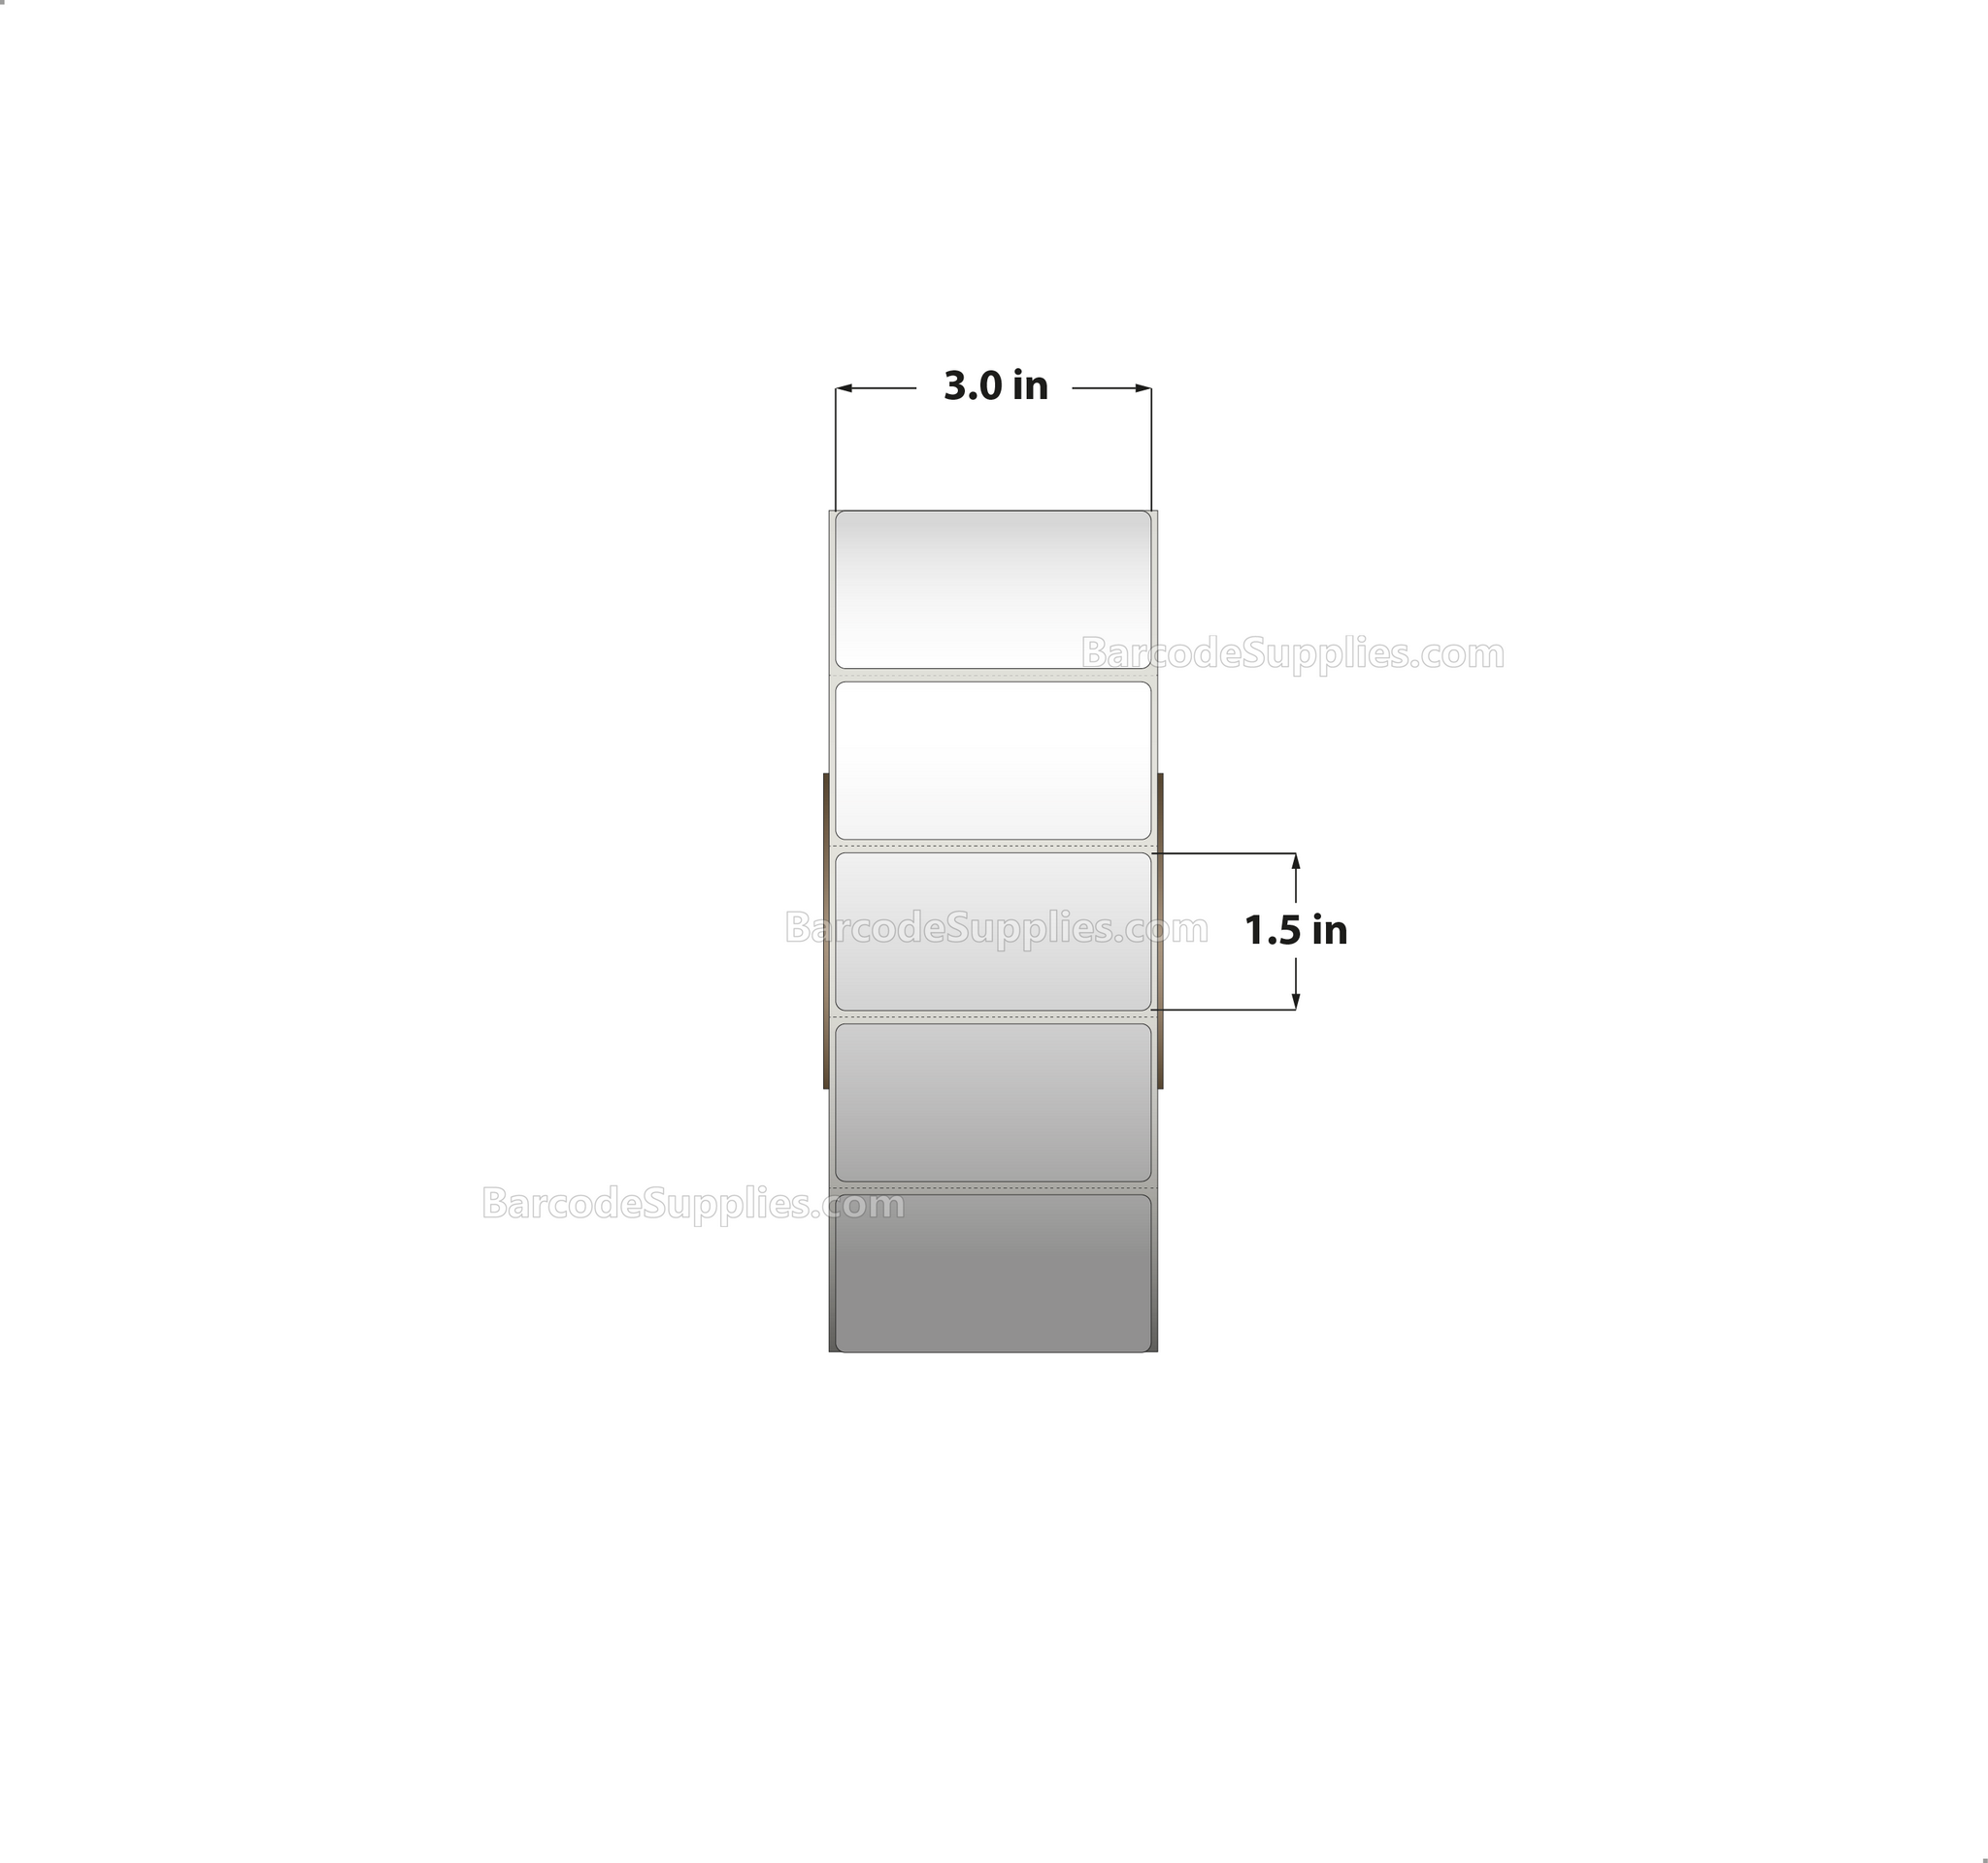 3 x 1.5 Direct Thermal White Labels With Acrylic Adhesive - Perforated - 3600 Labels Per Roll - Carton Of 8 Rolls - 28800 Labels Total - MPN: RD-3-15-3600-3 - BarcodeSource, Inc.